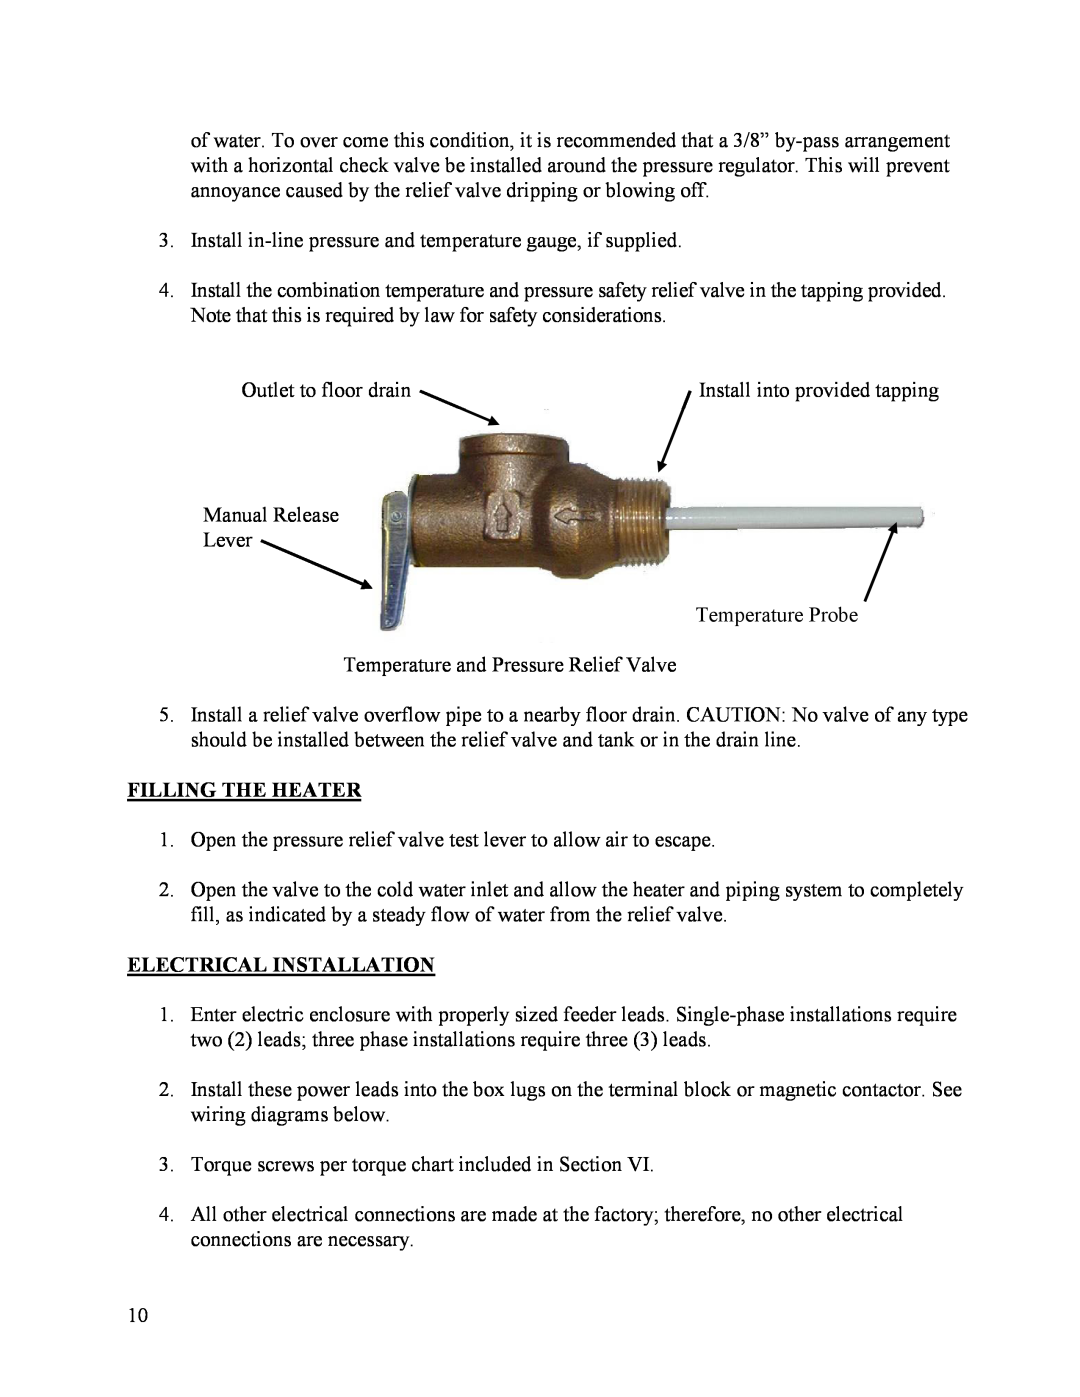 Hubbell Electric Heater Company A manual Filling The Heater, Electrical Installation 